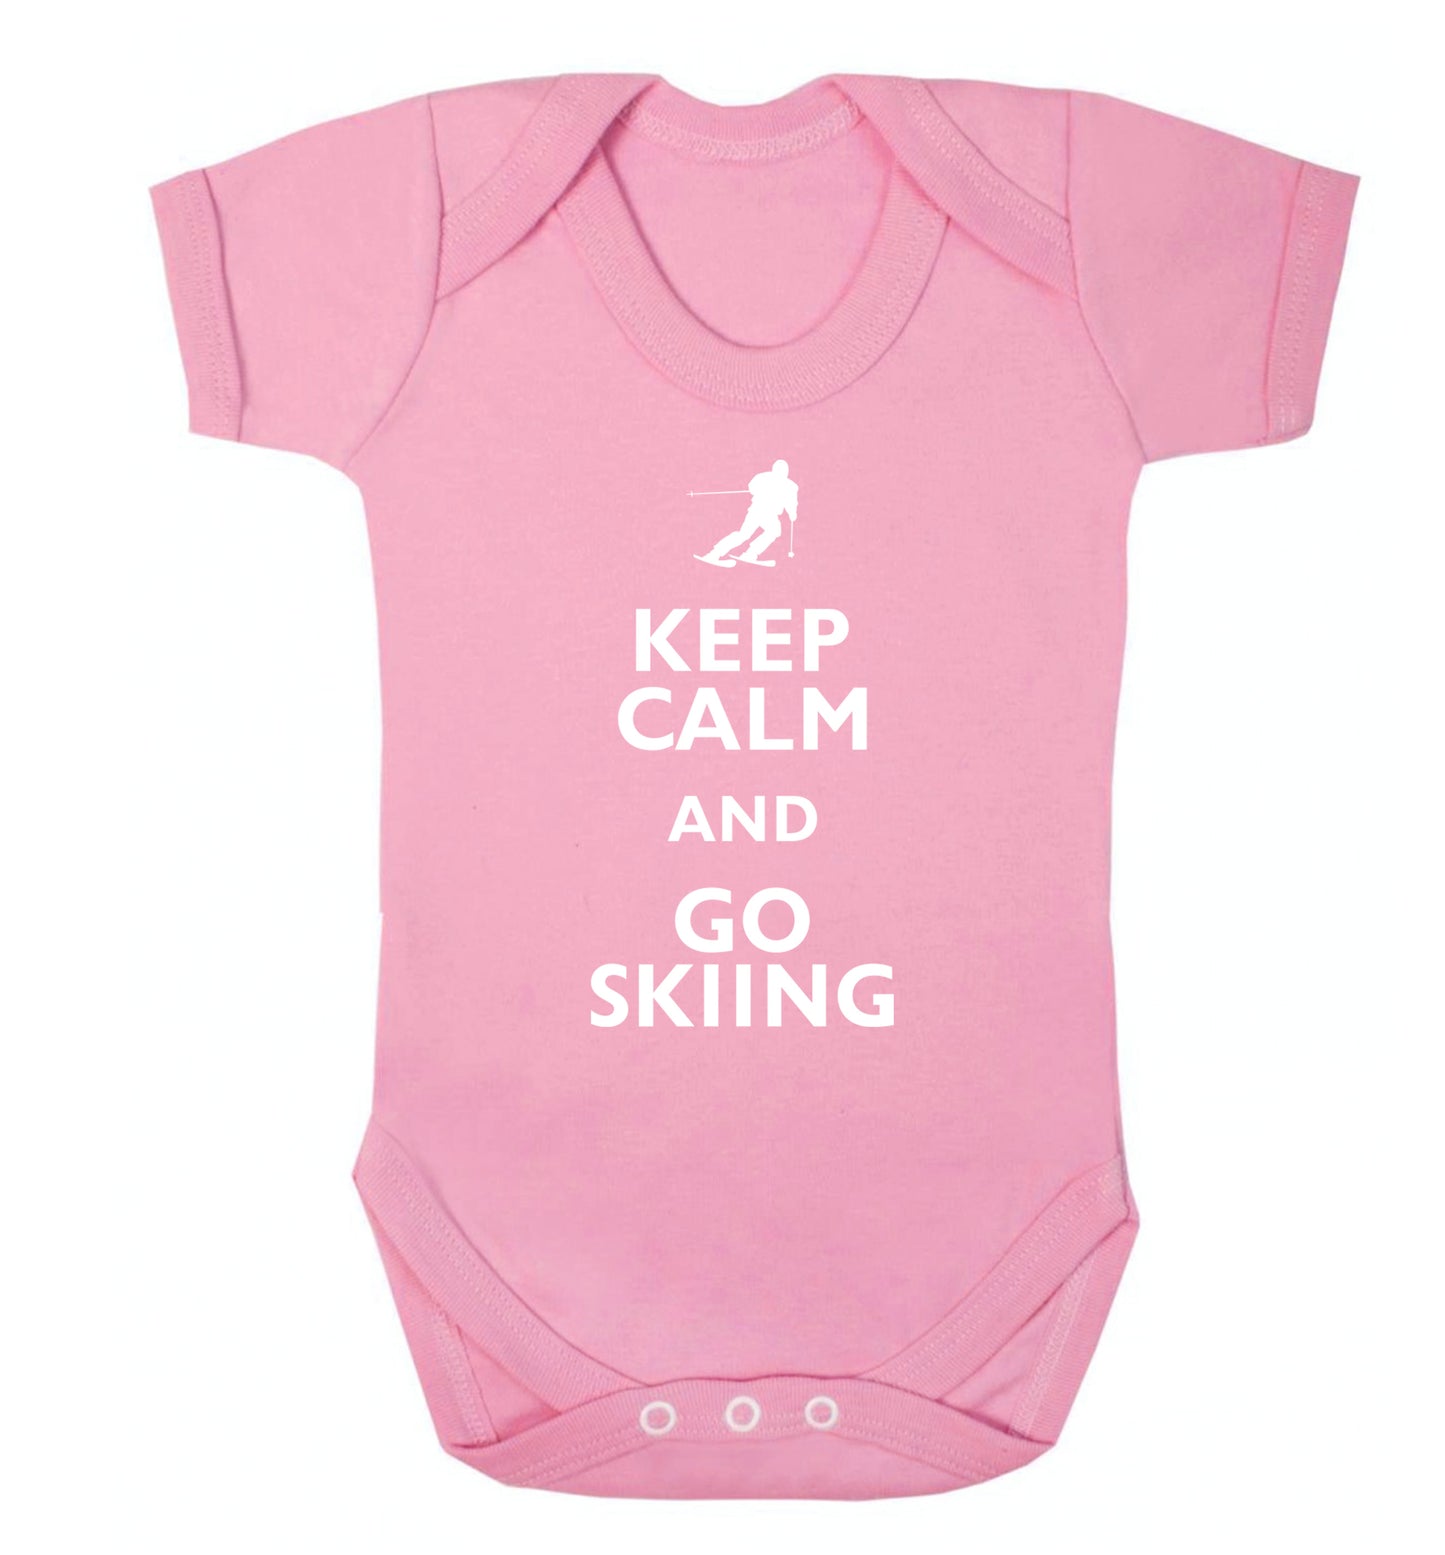 Keep calm and go skiing Baby Vest pale pink 18-24 months